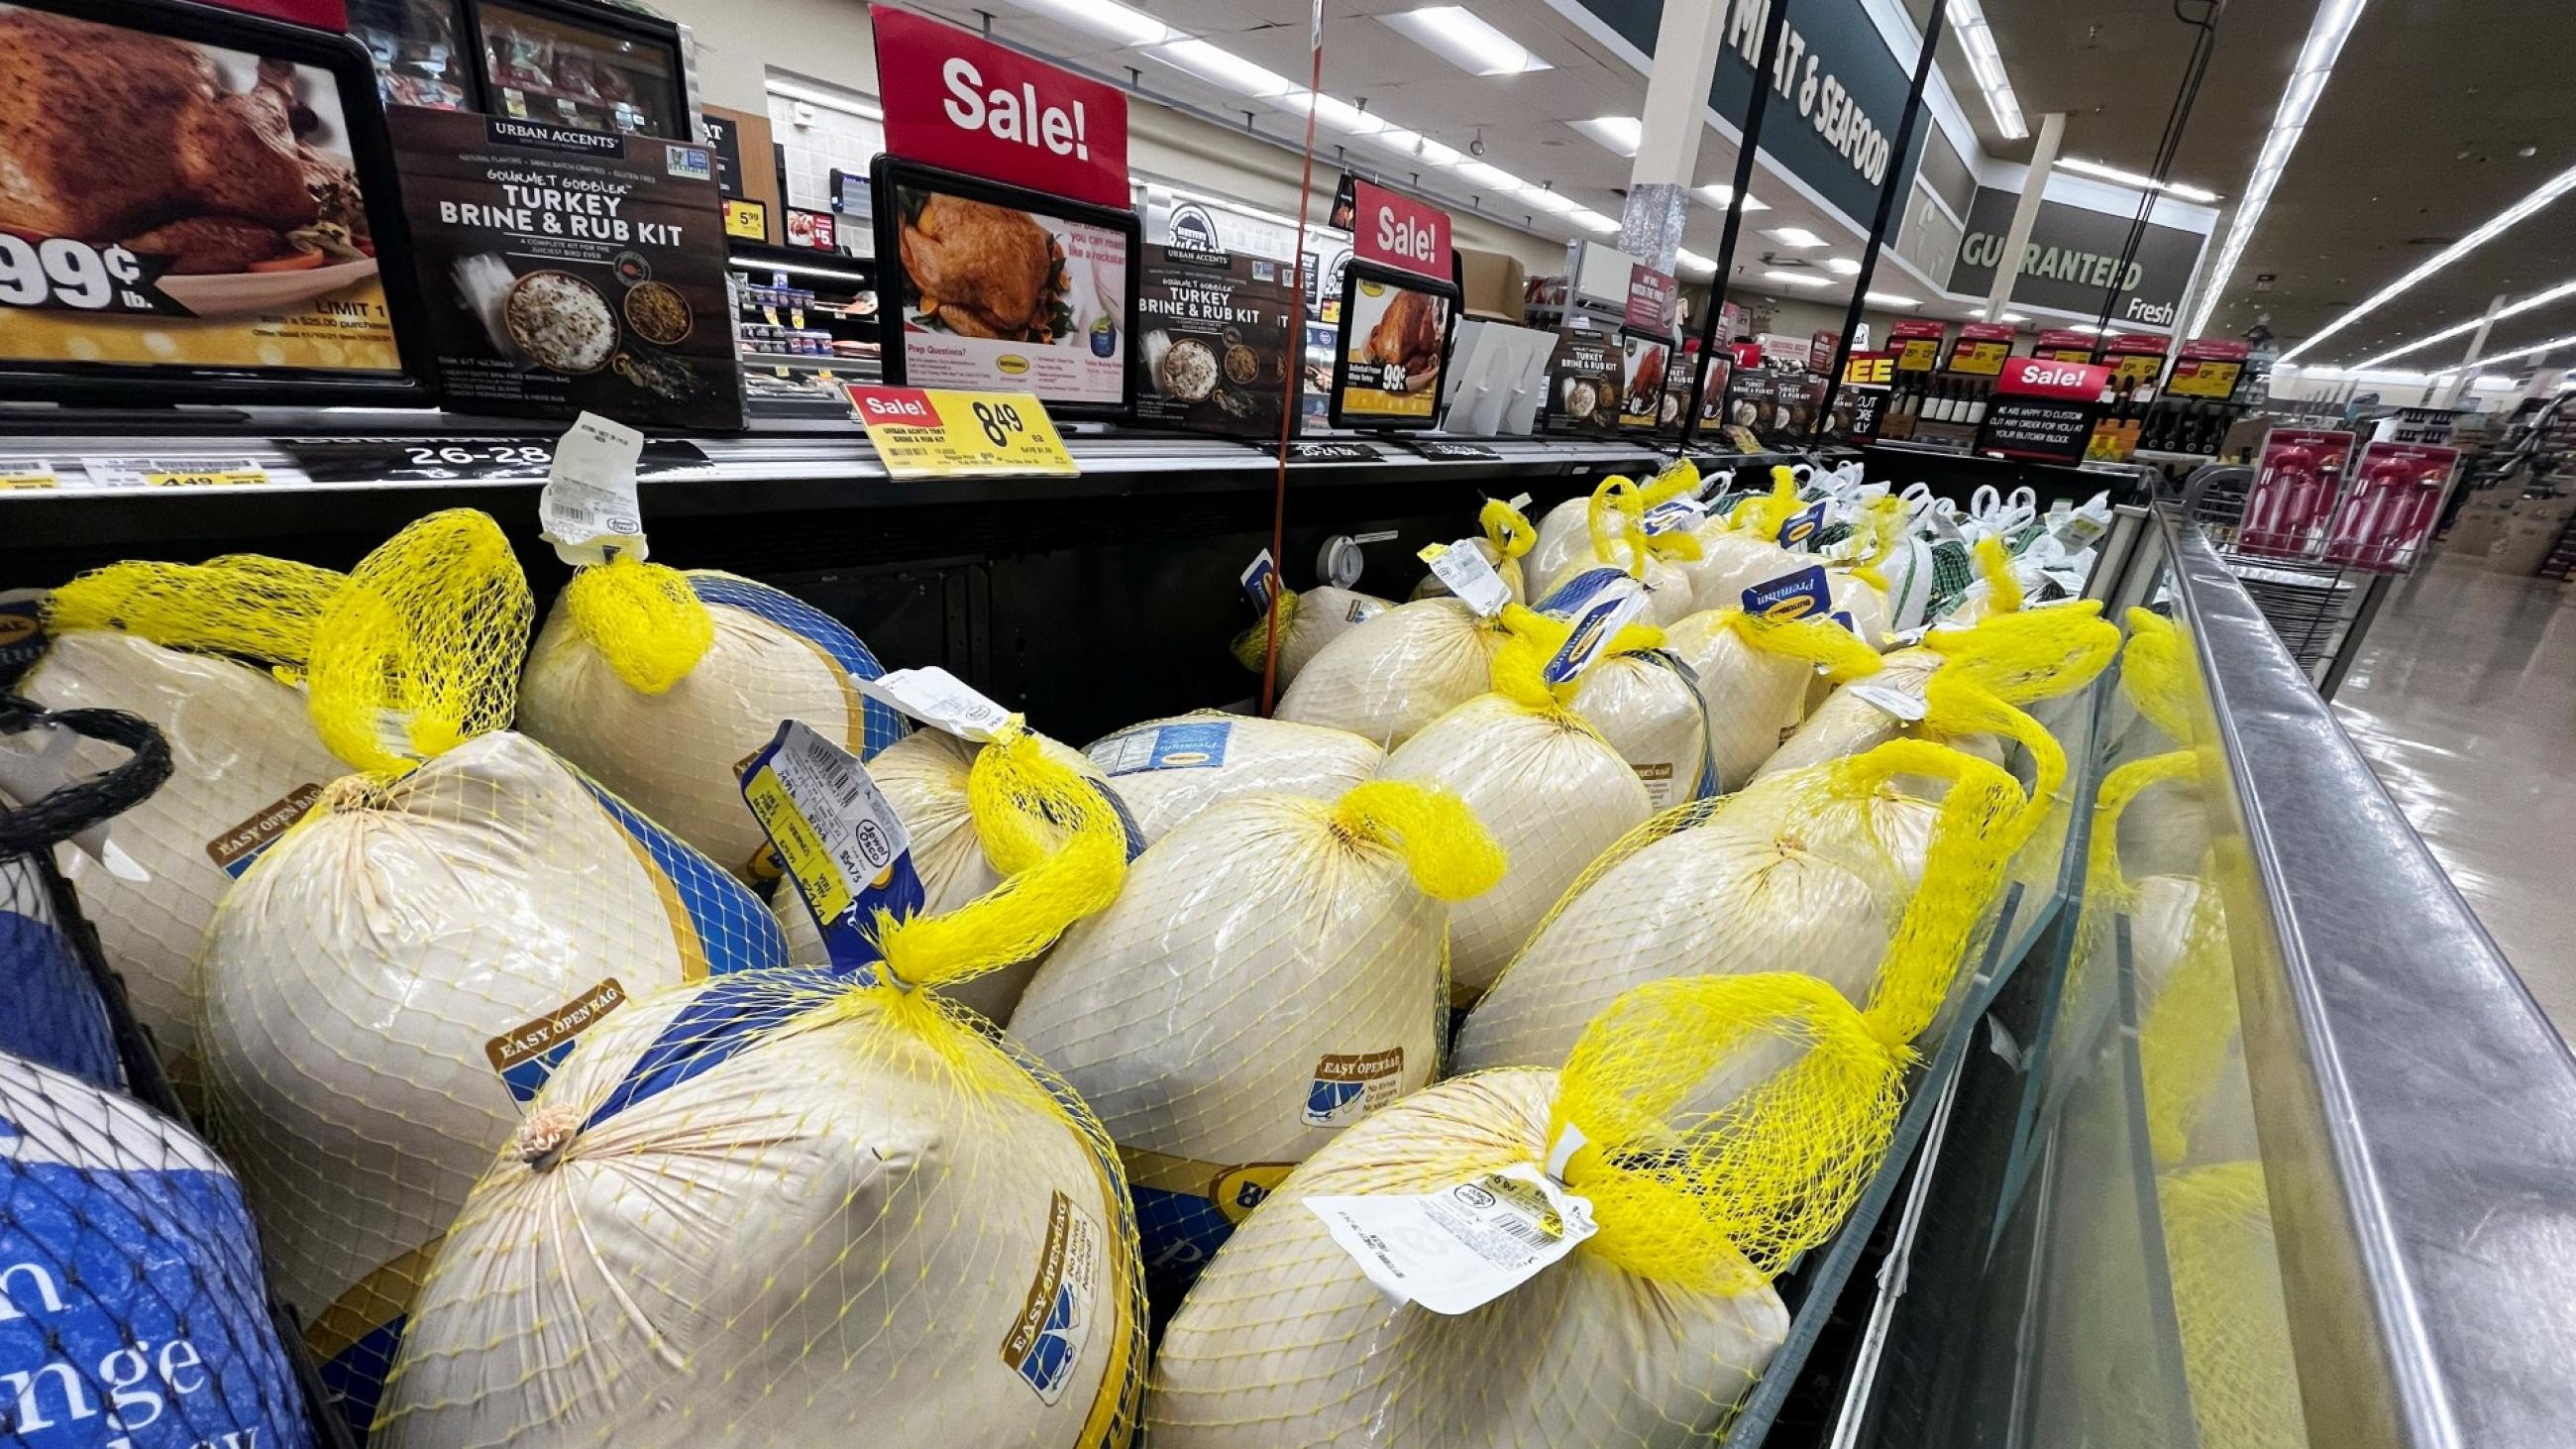 Turkeys are displayed for sale at a Jewel-Osco grocery store ahead of Thanksgiving, in Chicago, Illinois, on November 18, 2021.